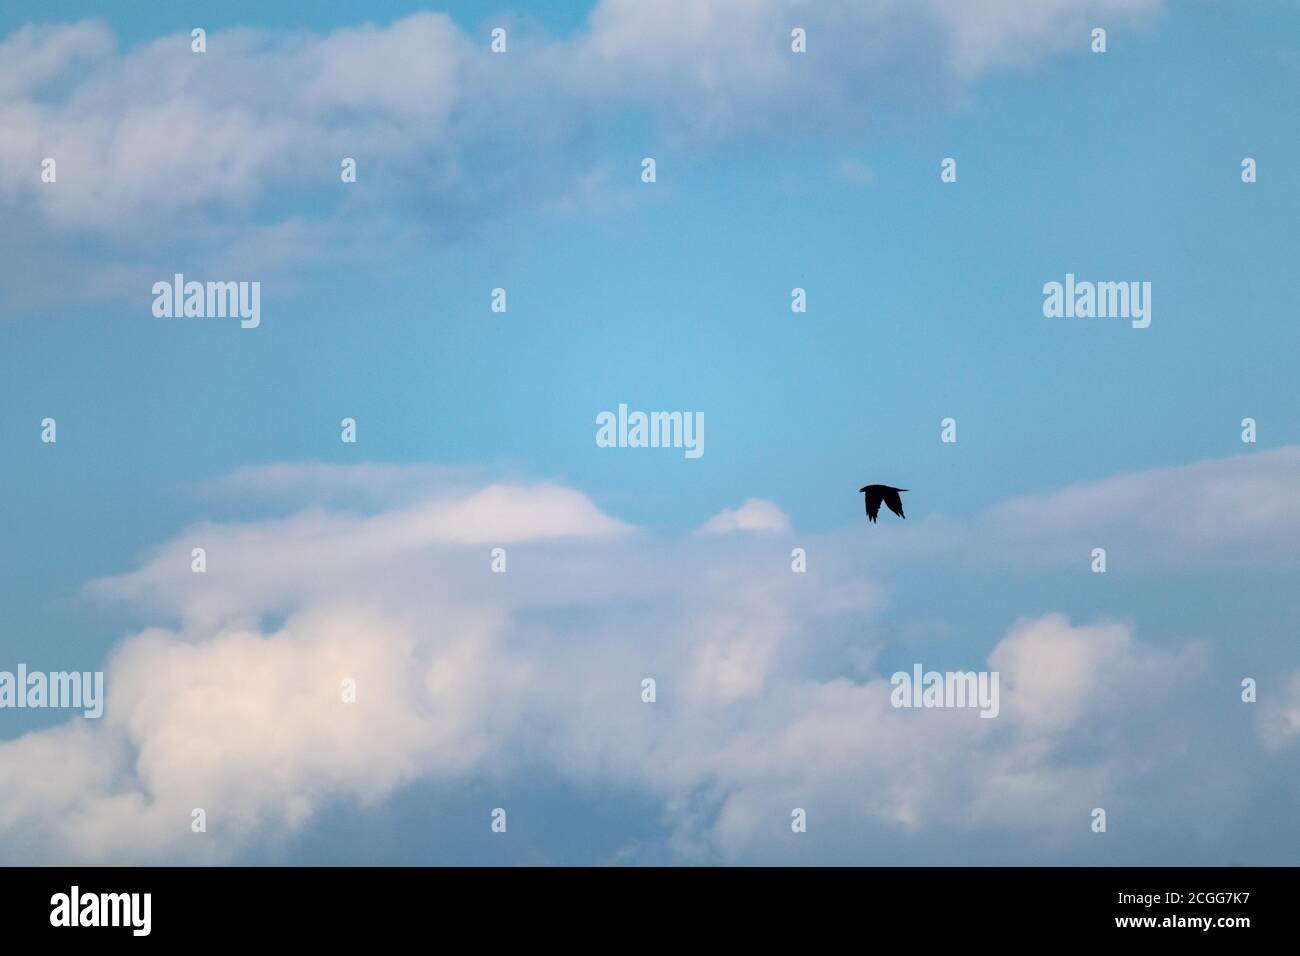 One single black bird silhouette flying hunting in cloudy evening blue sky Stock Photo